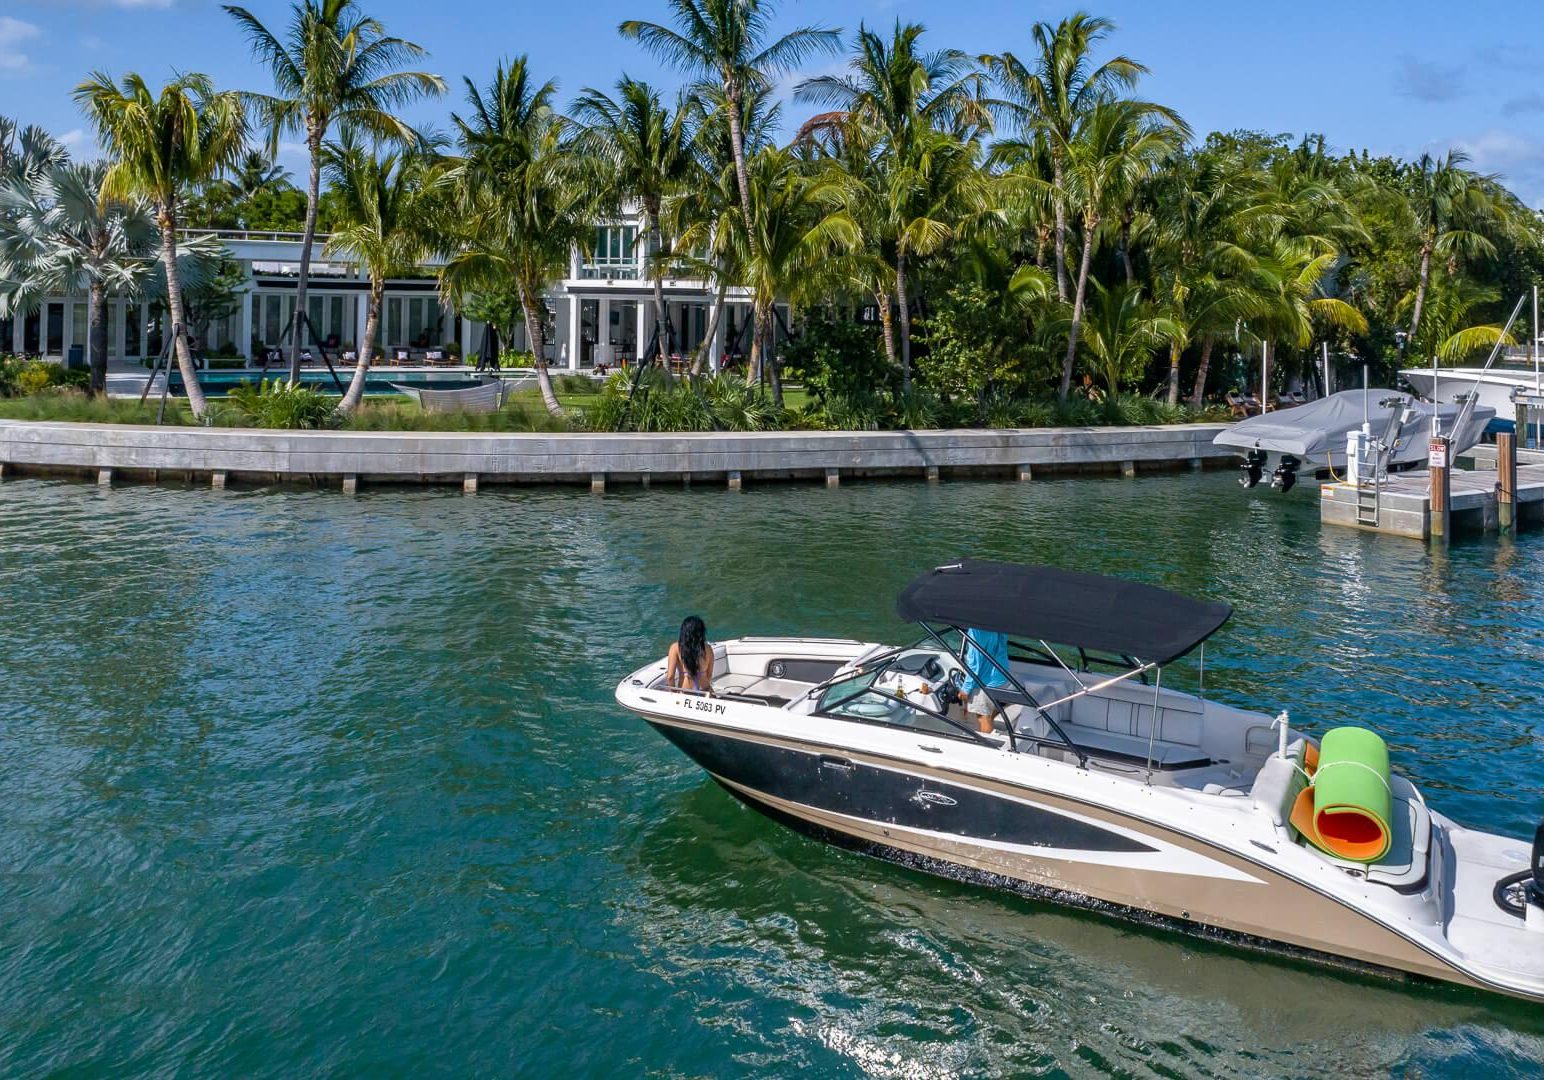 Prices All Included on Miami's Best Boat Rentals